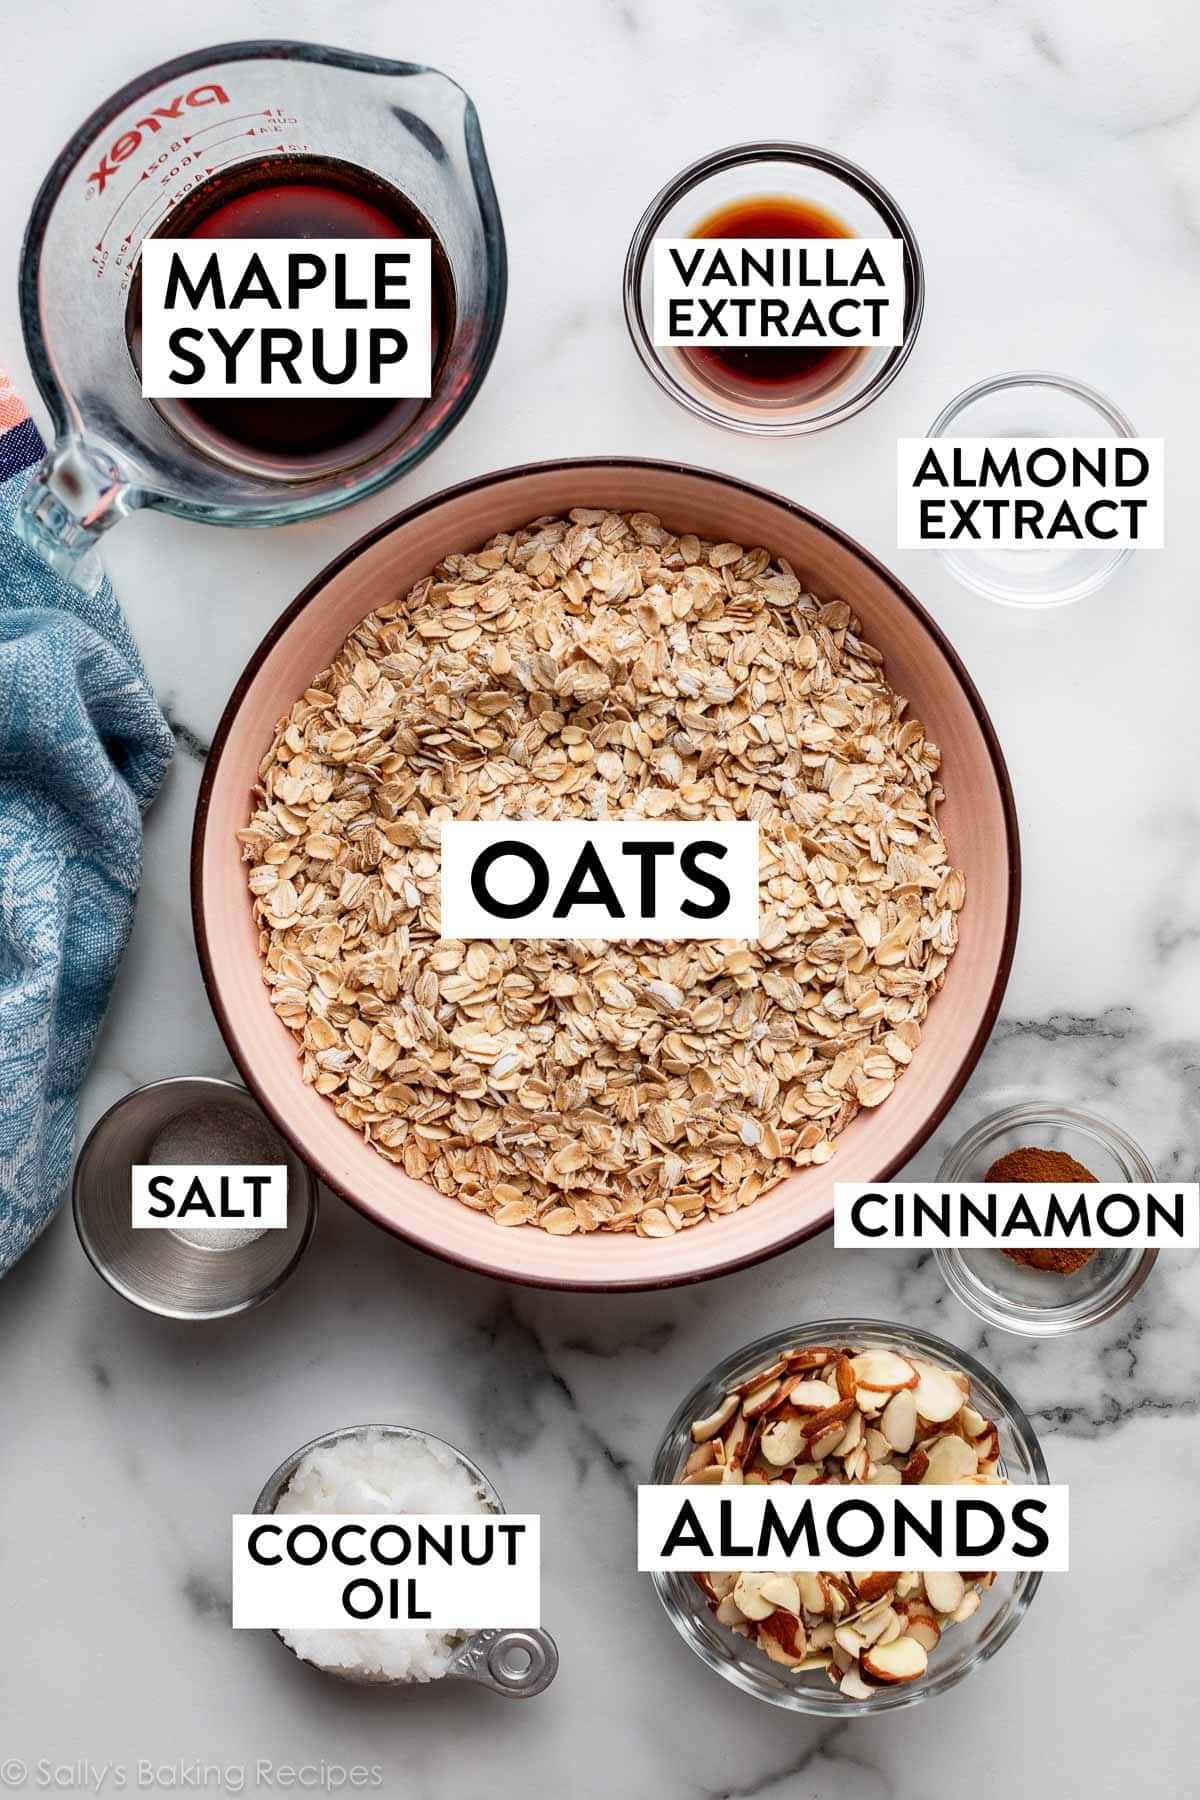 ingredients pictured in bowls including oats, maple syrup, vanilla extract, almonds, and coconut oil.